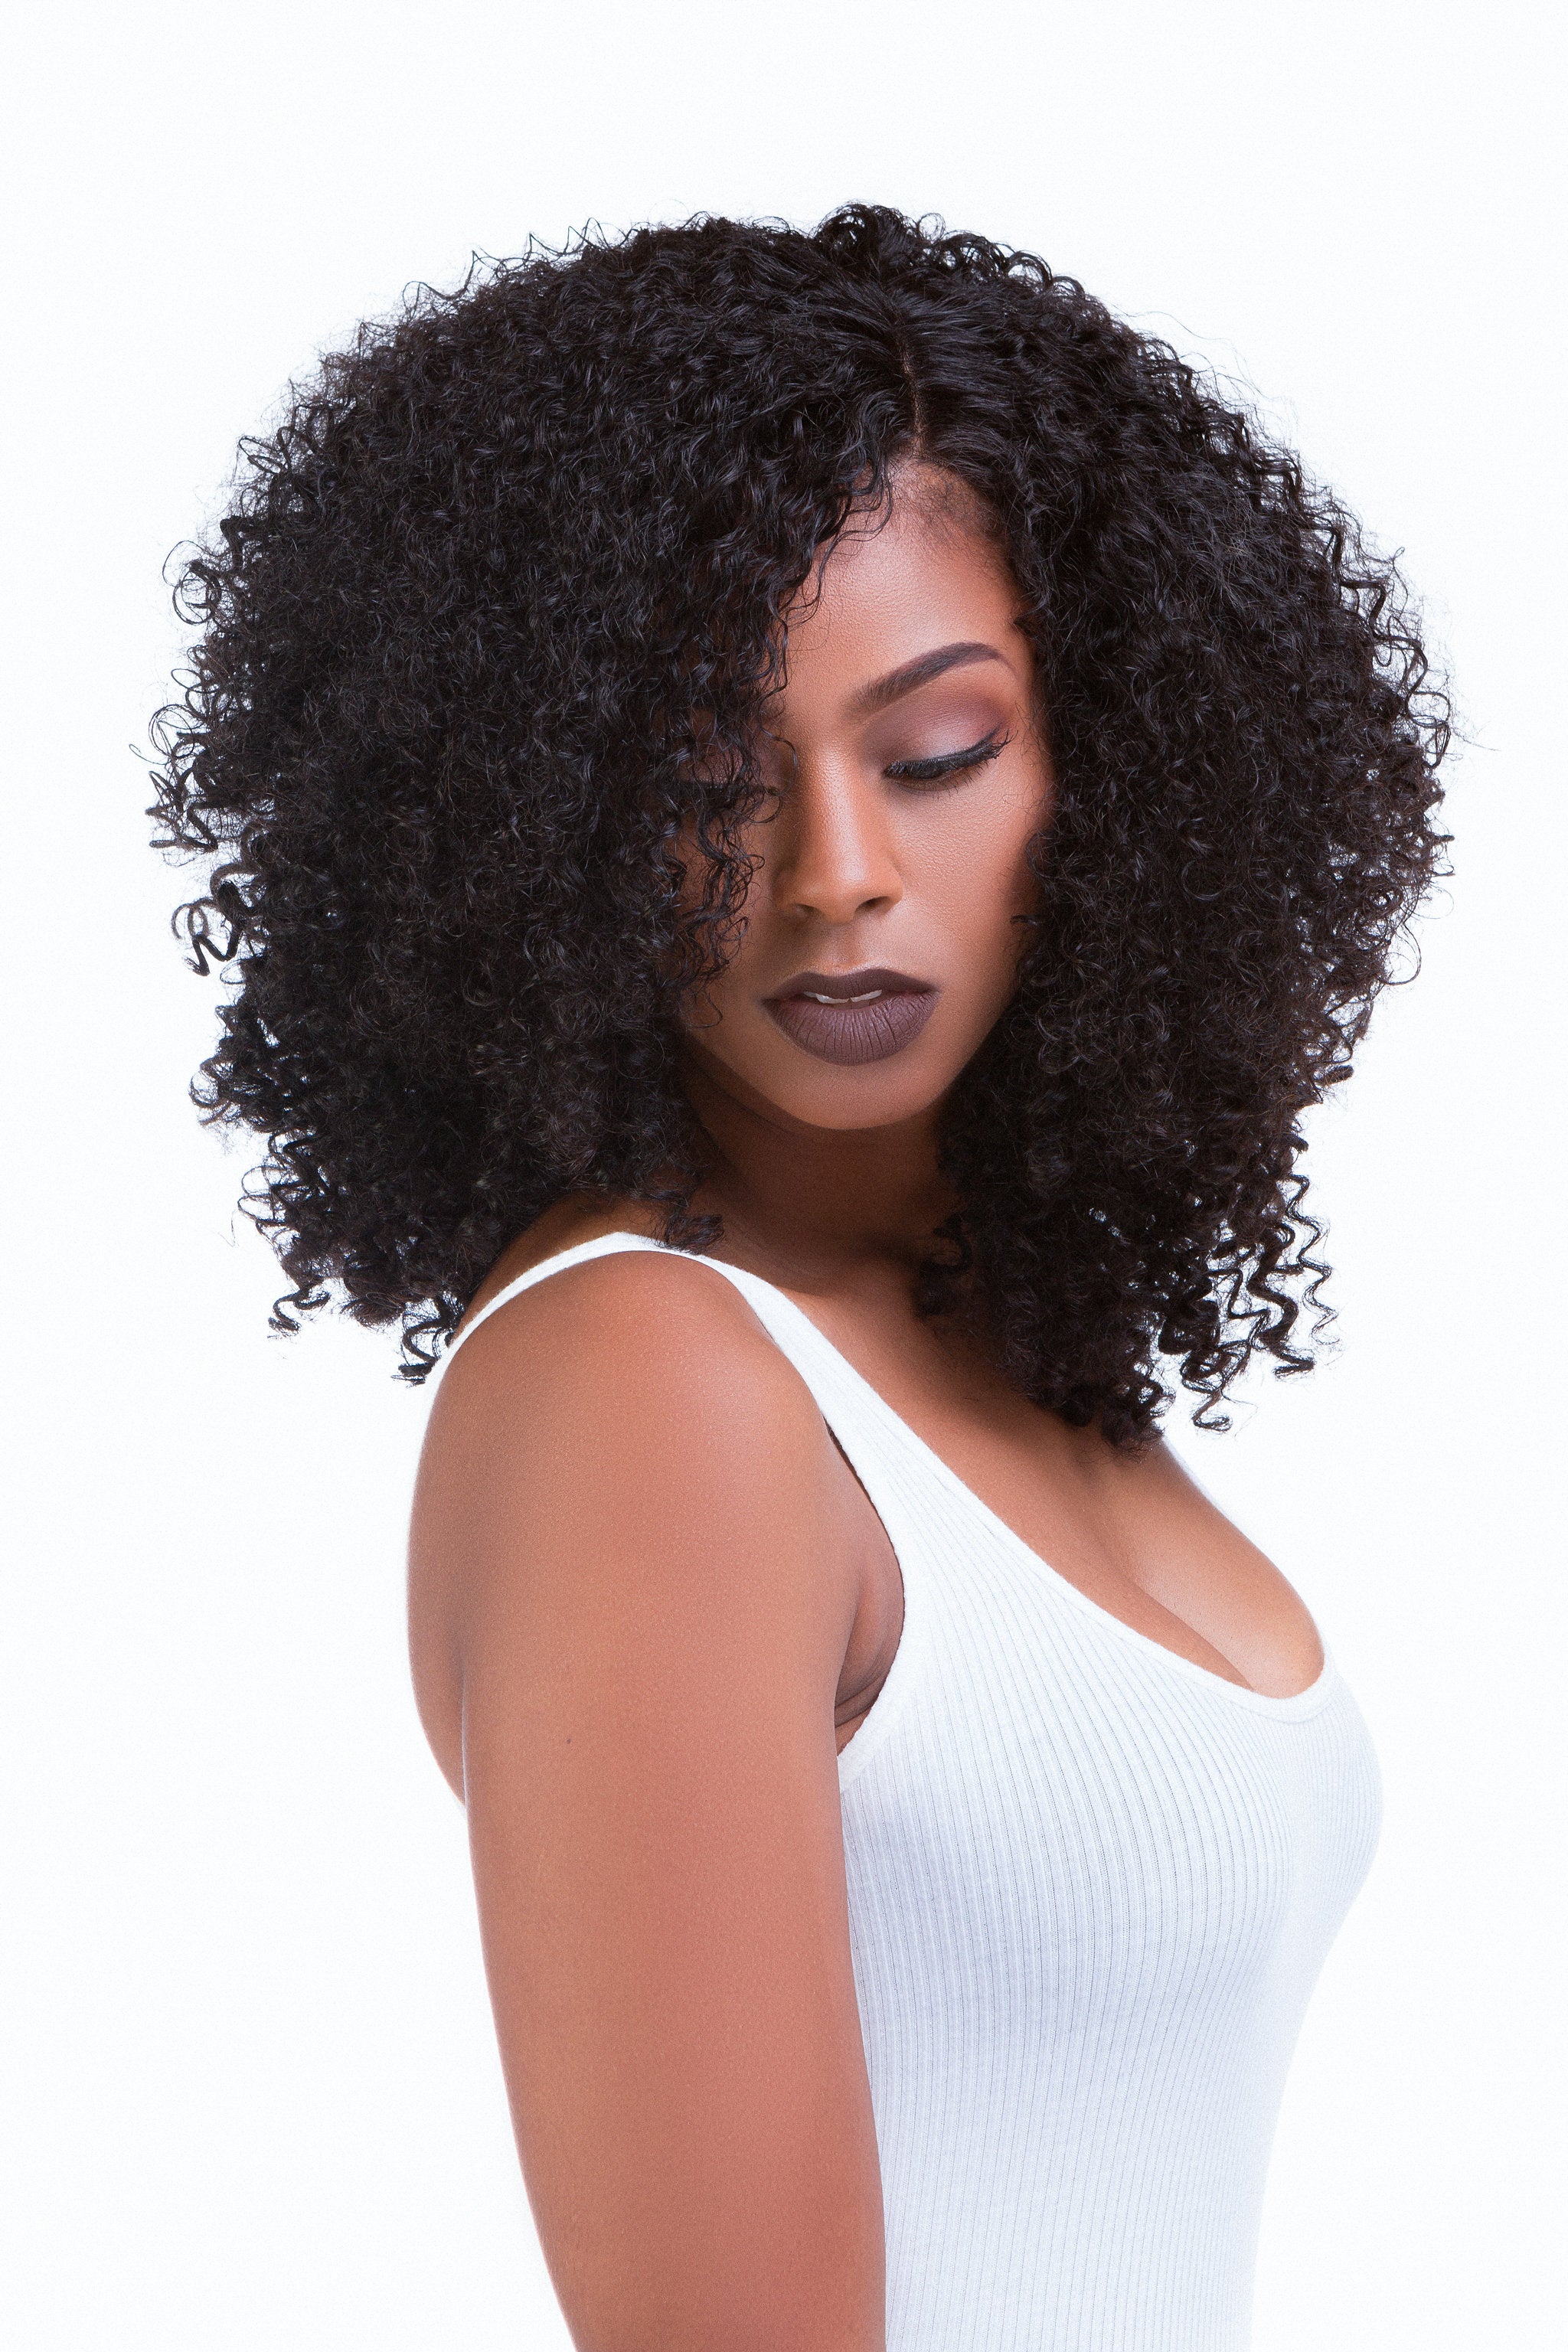 What Makes Brazilian Virgin Hair Extensions the Best Option by Far?